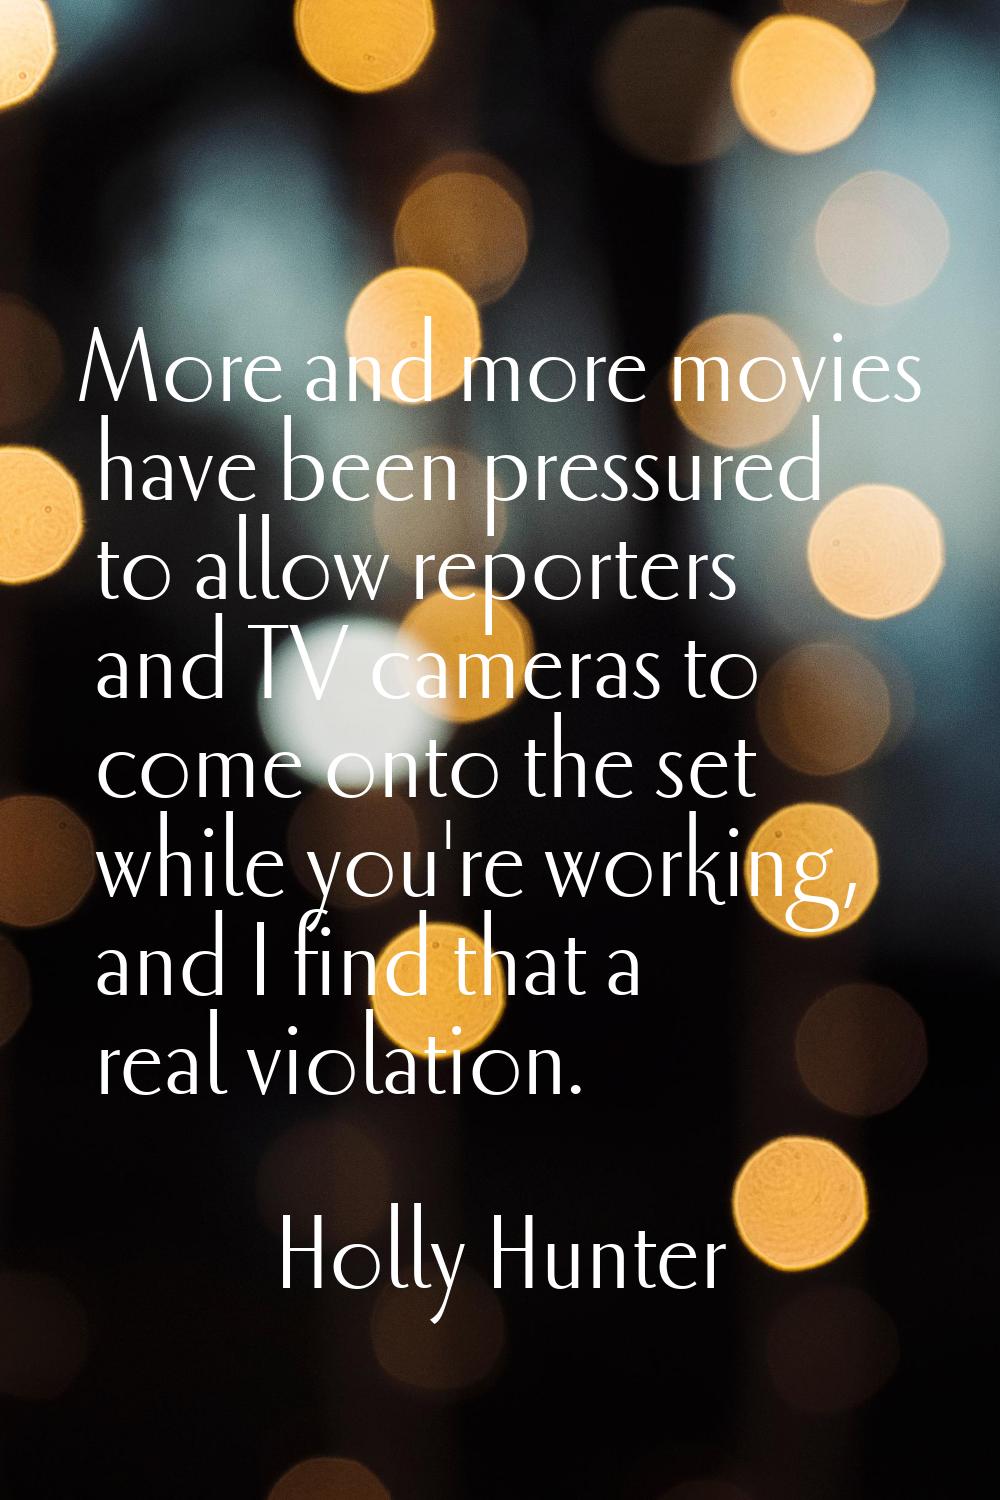 More and more movies have been pressured to allow reporters and TV cameras to come onto the set whi